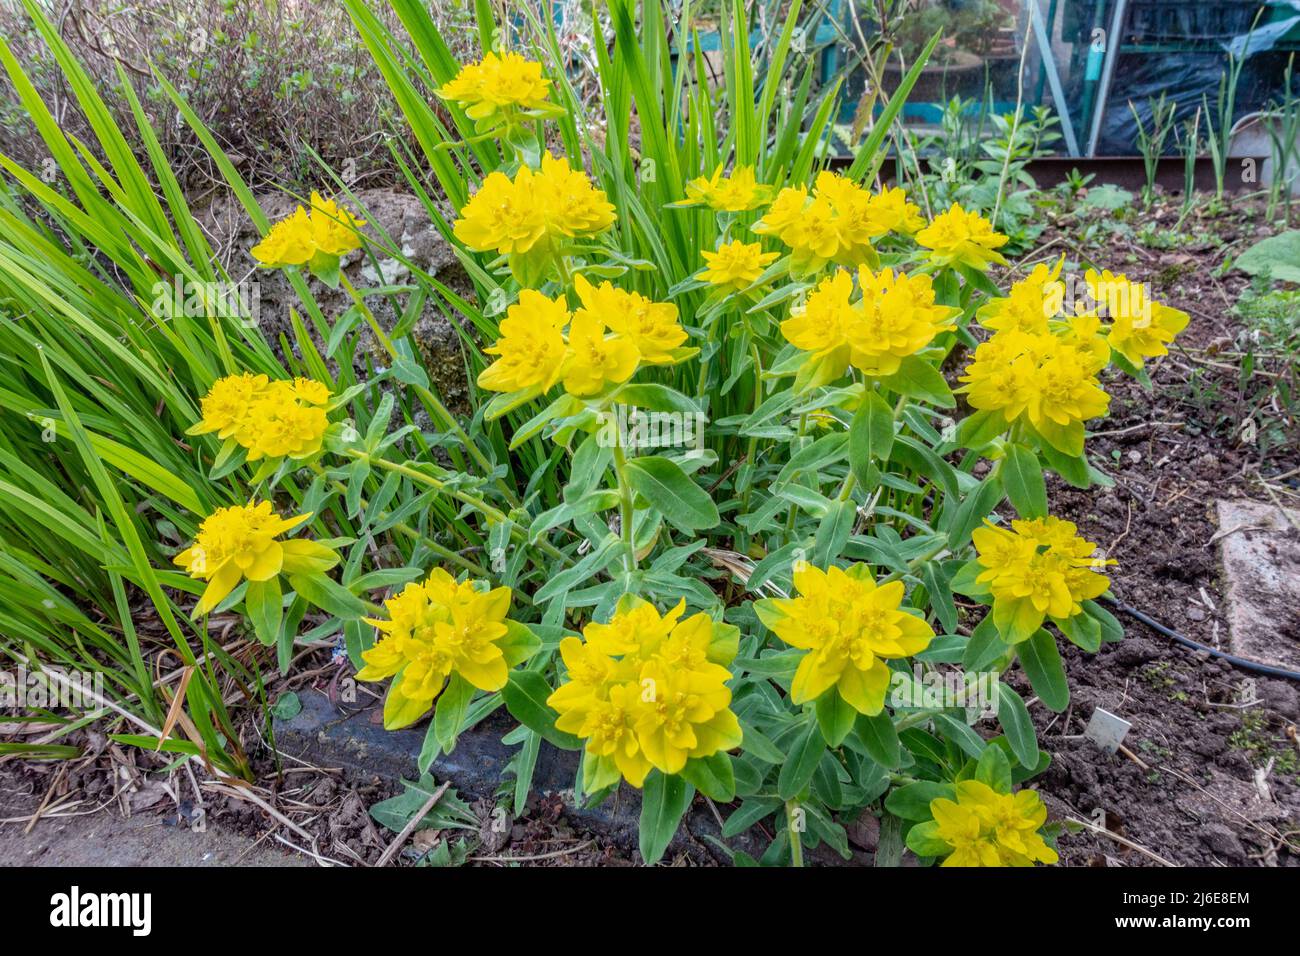 Euphorbia epithymoides orcushion spurge growing in a garden, flowering with bright yellow flowers. Stock Photo